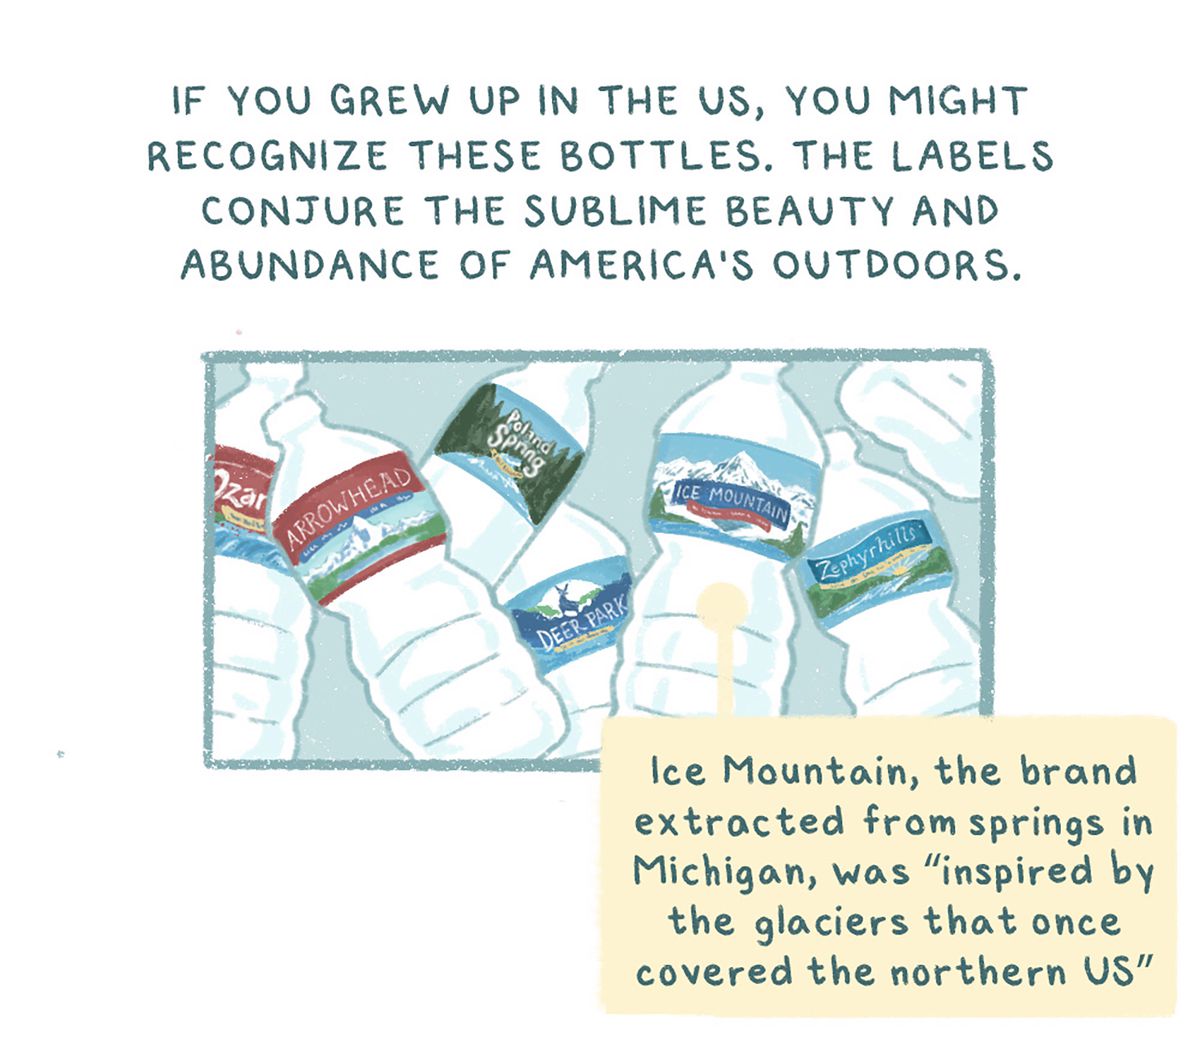 Text: “If you grew up in the US, you might recognize these bottles. The labels conjure the sublime beauty and abundance of America’s outdoors.” Drawing of bottled water with a bubble on one that reads: “Ice Mountain, the brand extracted from springs in Michigan, was ‘inspired by the glaciers that once covered the northern US’”